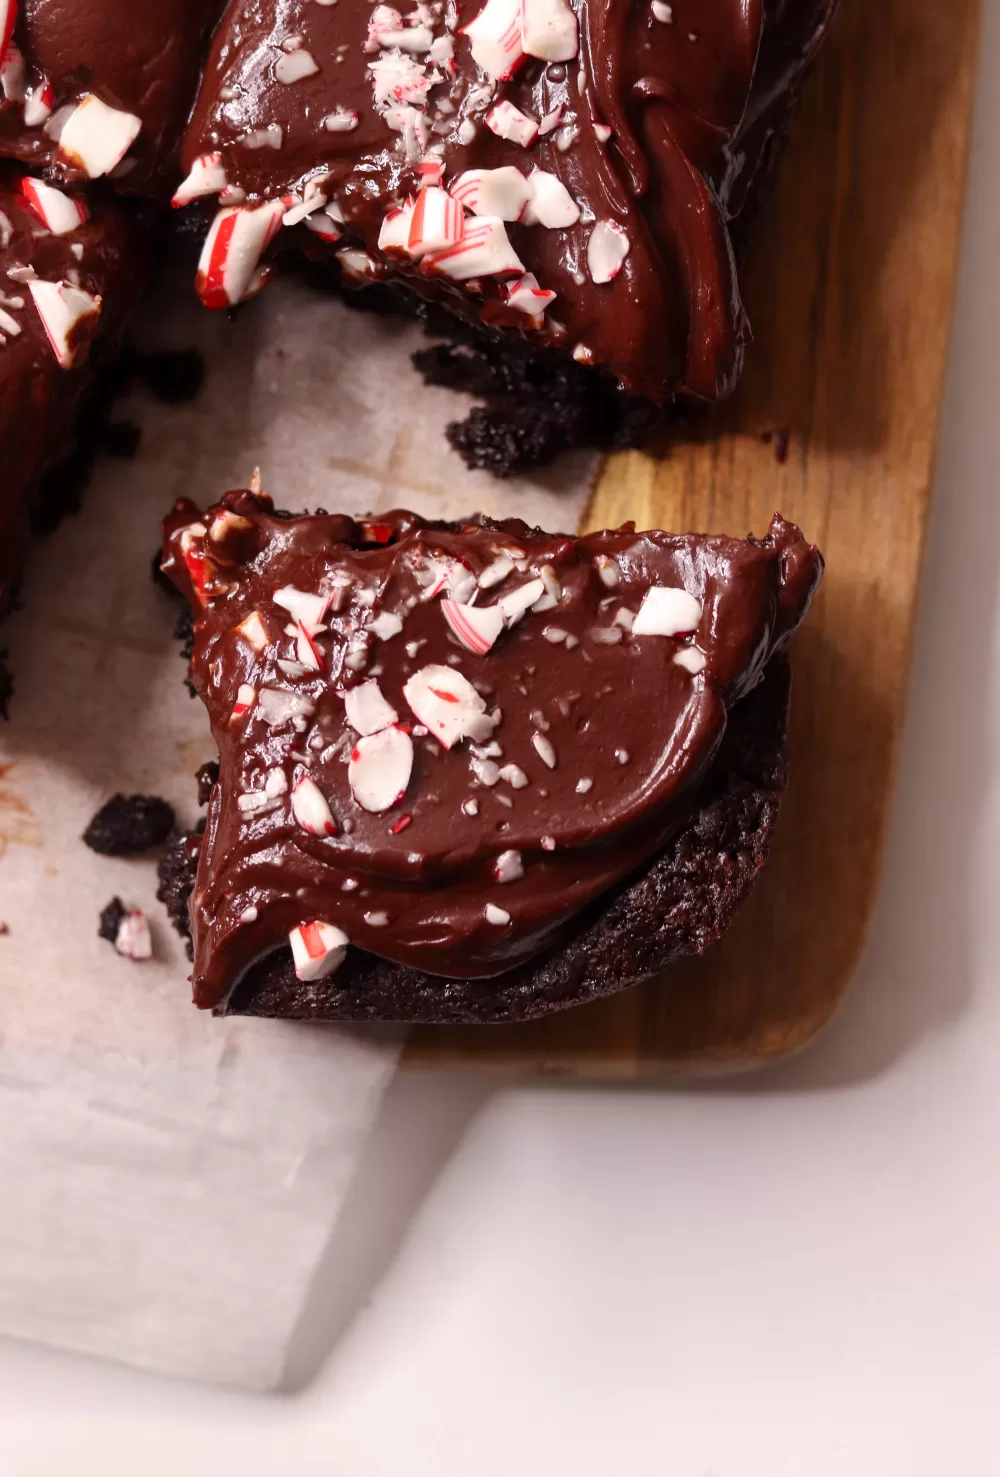 A single peppermint mocha brownie on a wooden cutting board covered with parchment paper. The brownie is pulled away from the rest of the brownies, swirled with dark chocolate ganache and sprinkled with crushed peppermint.